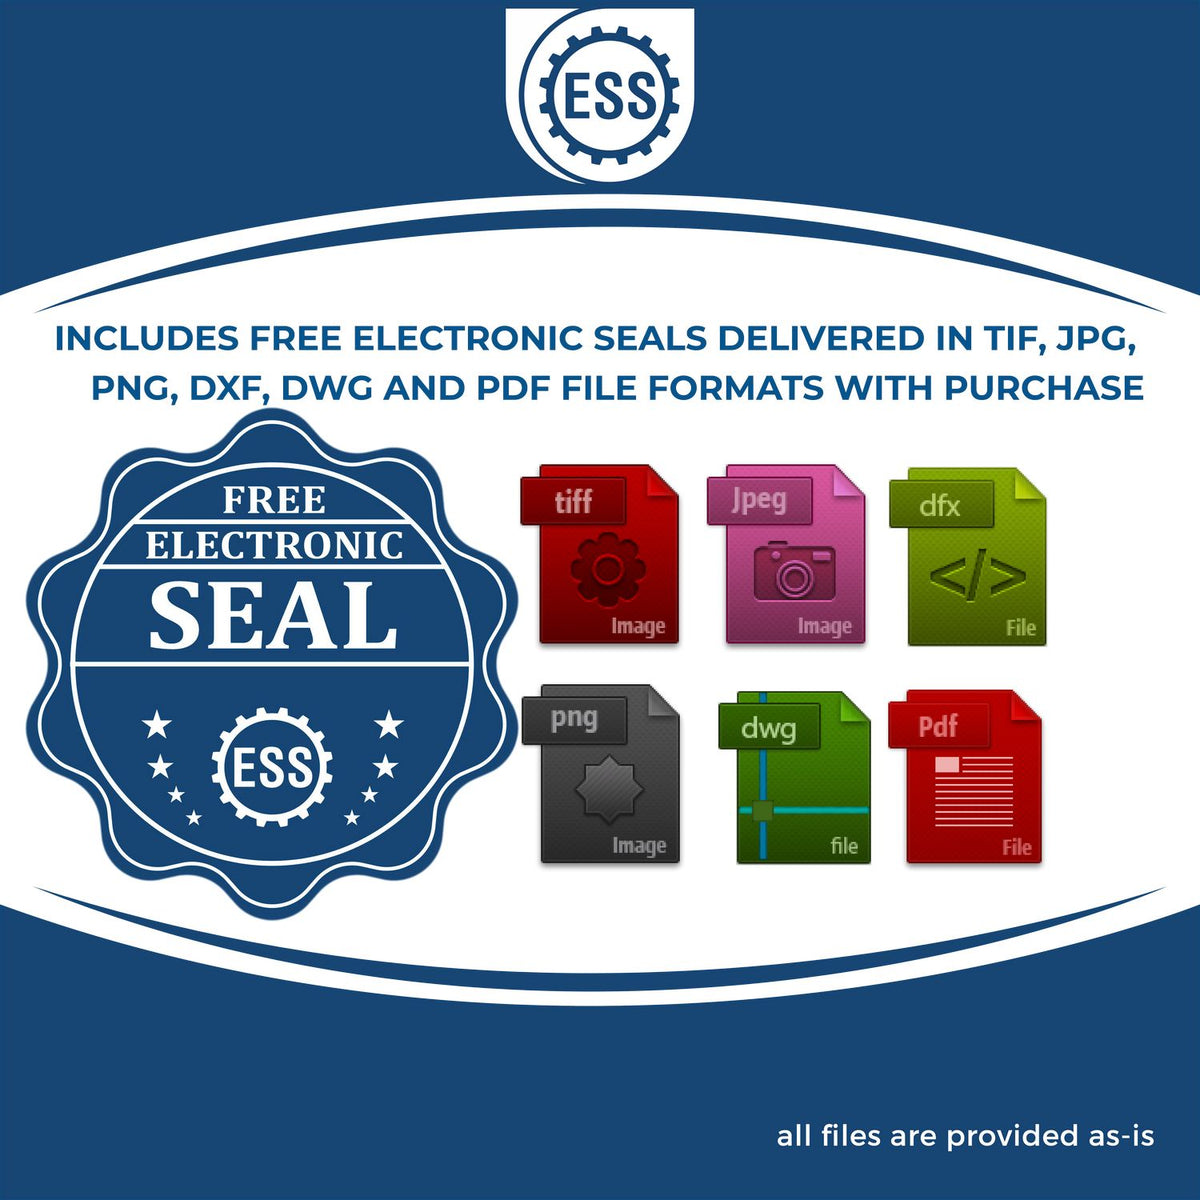 An infographic for the free electronic seal for the Long Reach Guam PE Seal illustrating the different file type icons such as DXF, DWG, TIF, JPG and PNG.